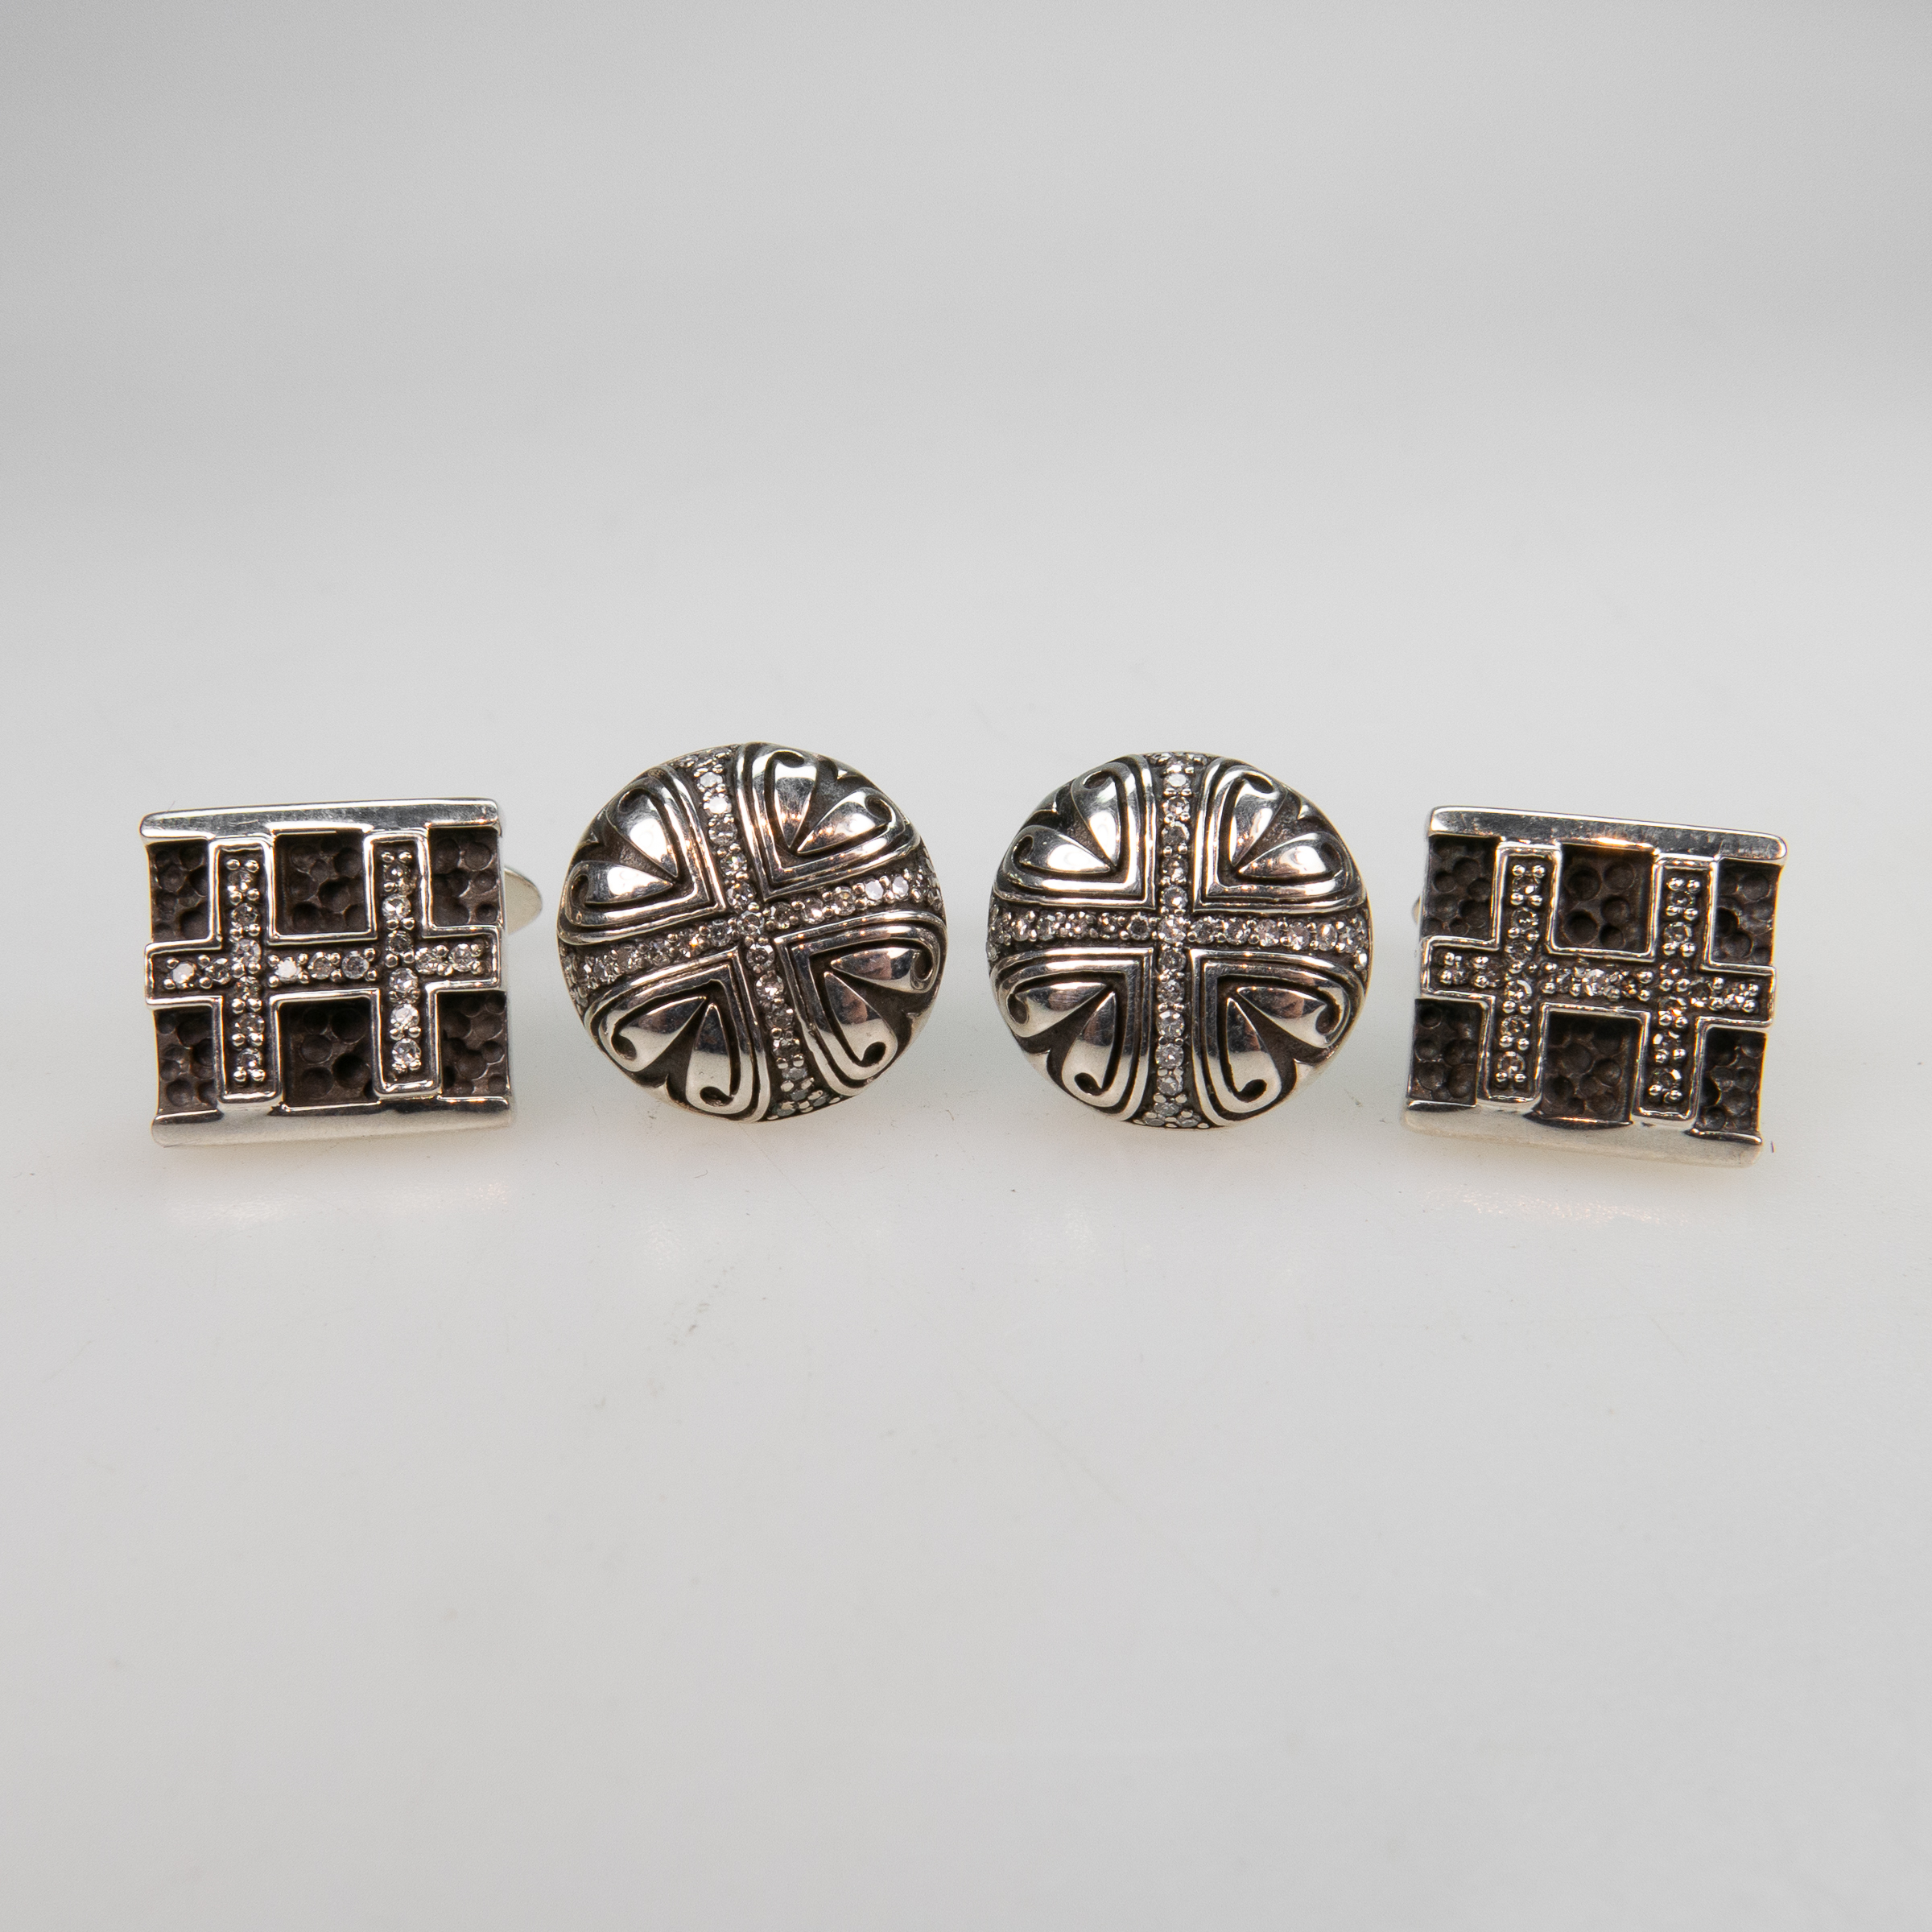 Two Pairs Of Small Sterling Silver Cufflinks